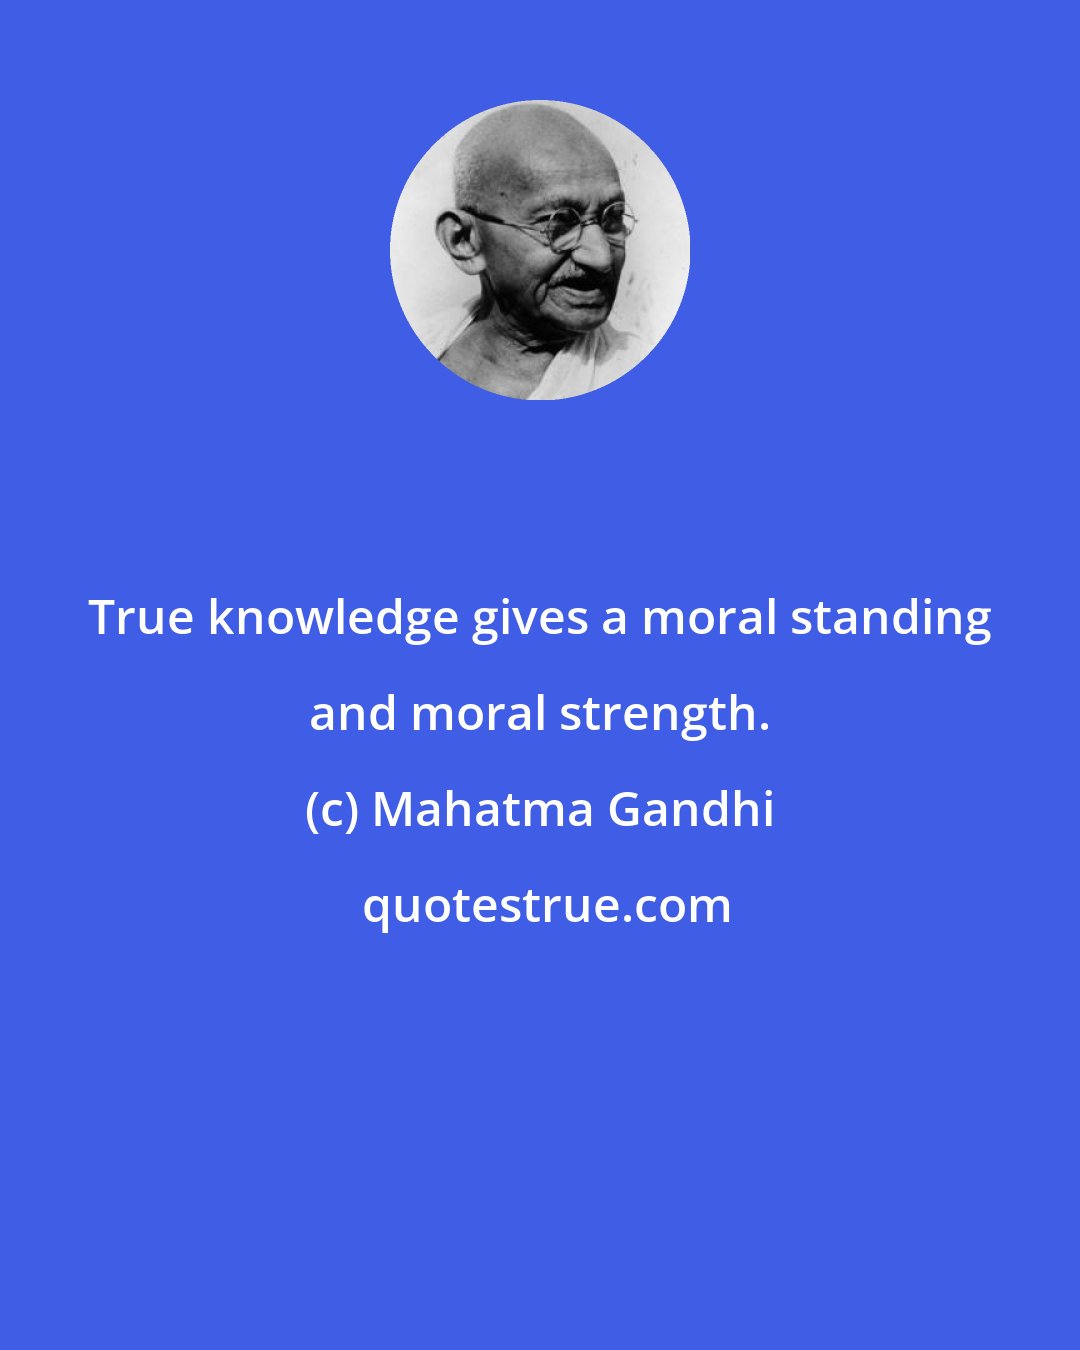 Mahatma Gandhi: True knowledge gives a moral standing and moral strength.